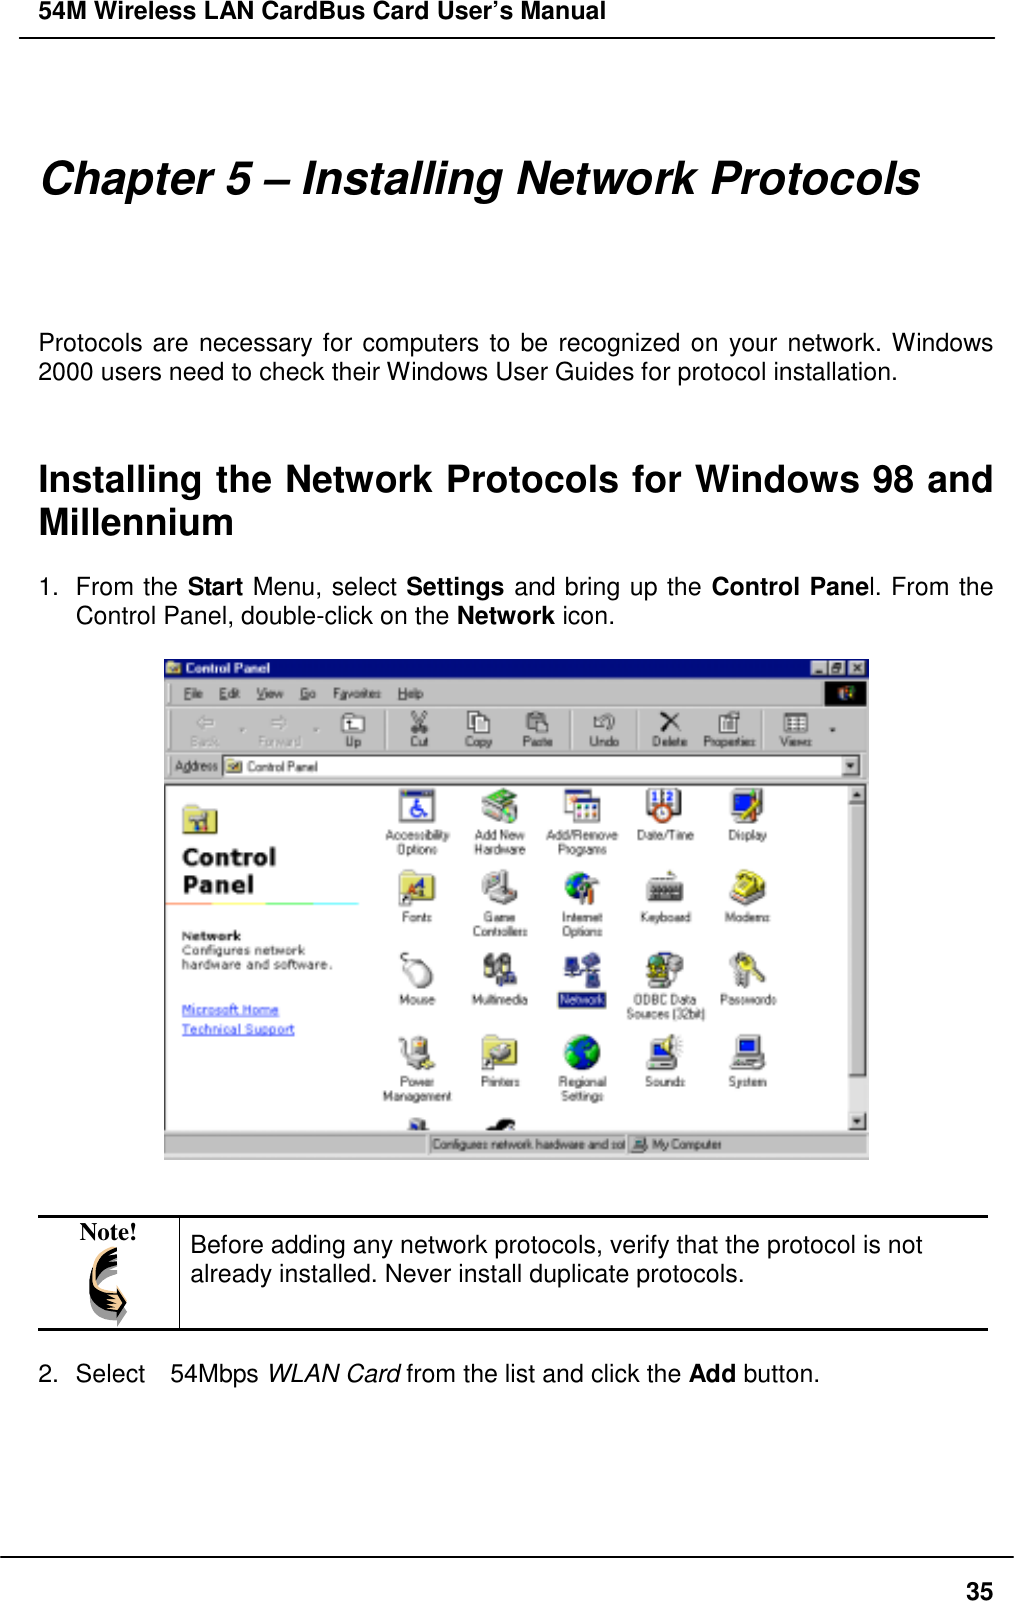 54M Wireless LAN CardBus Card User’s Manual35Chapter 5 – Installing Network ProtocolsProtocols are necessary for computers to be recognized on your network. Windows2000 users need to check their Windows User Guides for protocol installation.Installing the Network Protocols for Windows 98 andMillennium1. From the Start Menu, select Settings and bring up the Control Panel. From theControl Panel, double-click on the Network icon.Note! Before adding any network protocols, verify that the protocol is notalready installed. Never install duplicate protocols.2.  Select  54Mbps WLAN Card from the list and click the Add button.